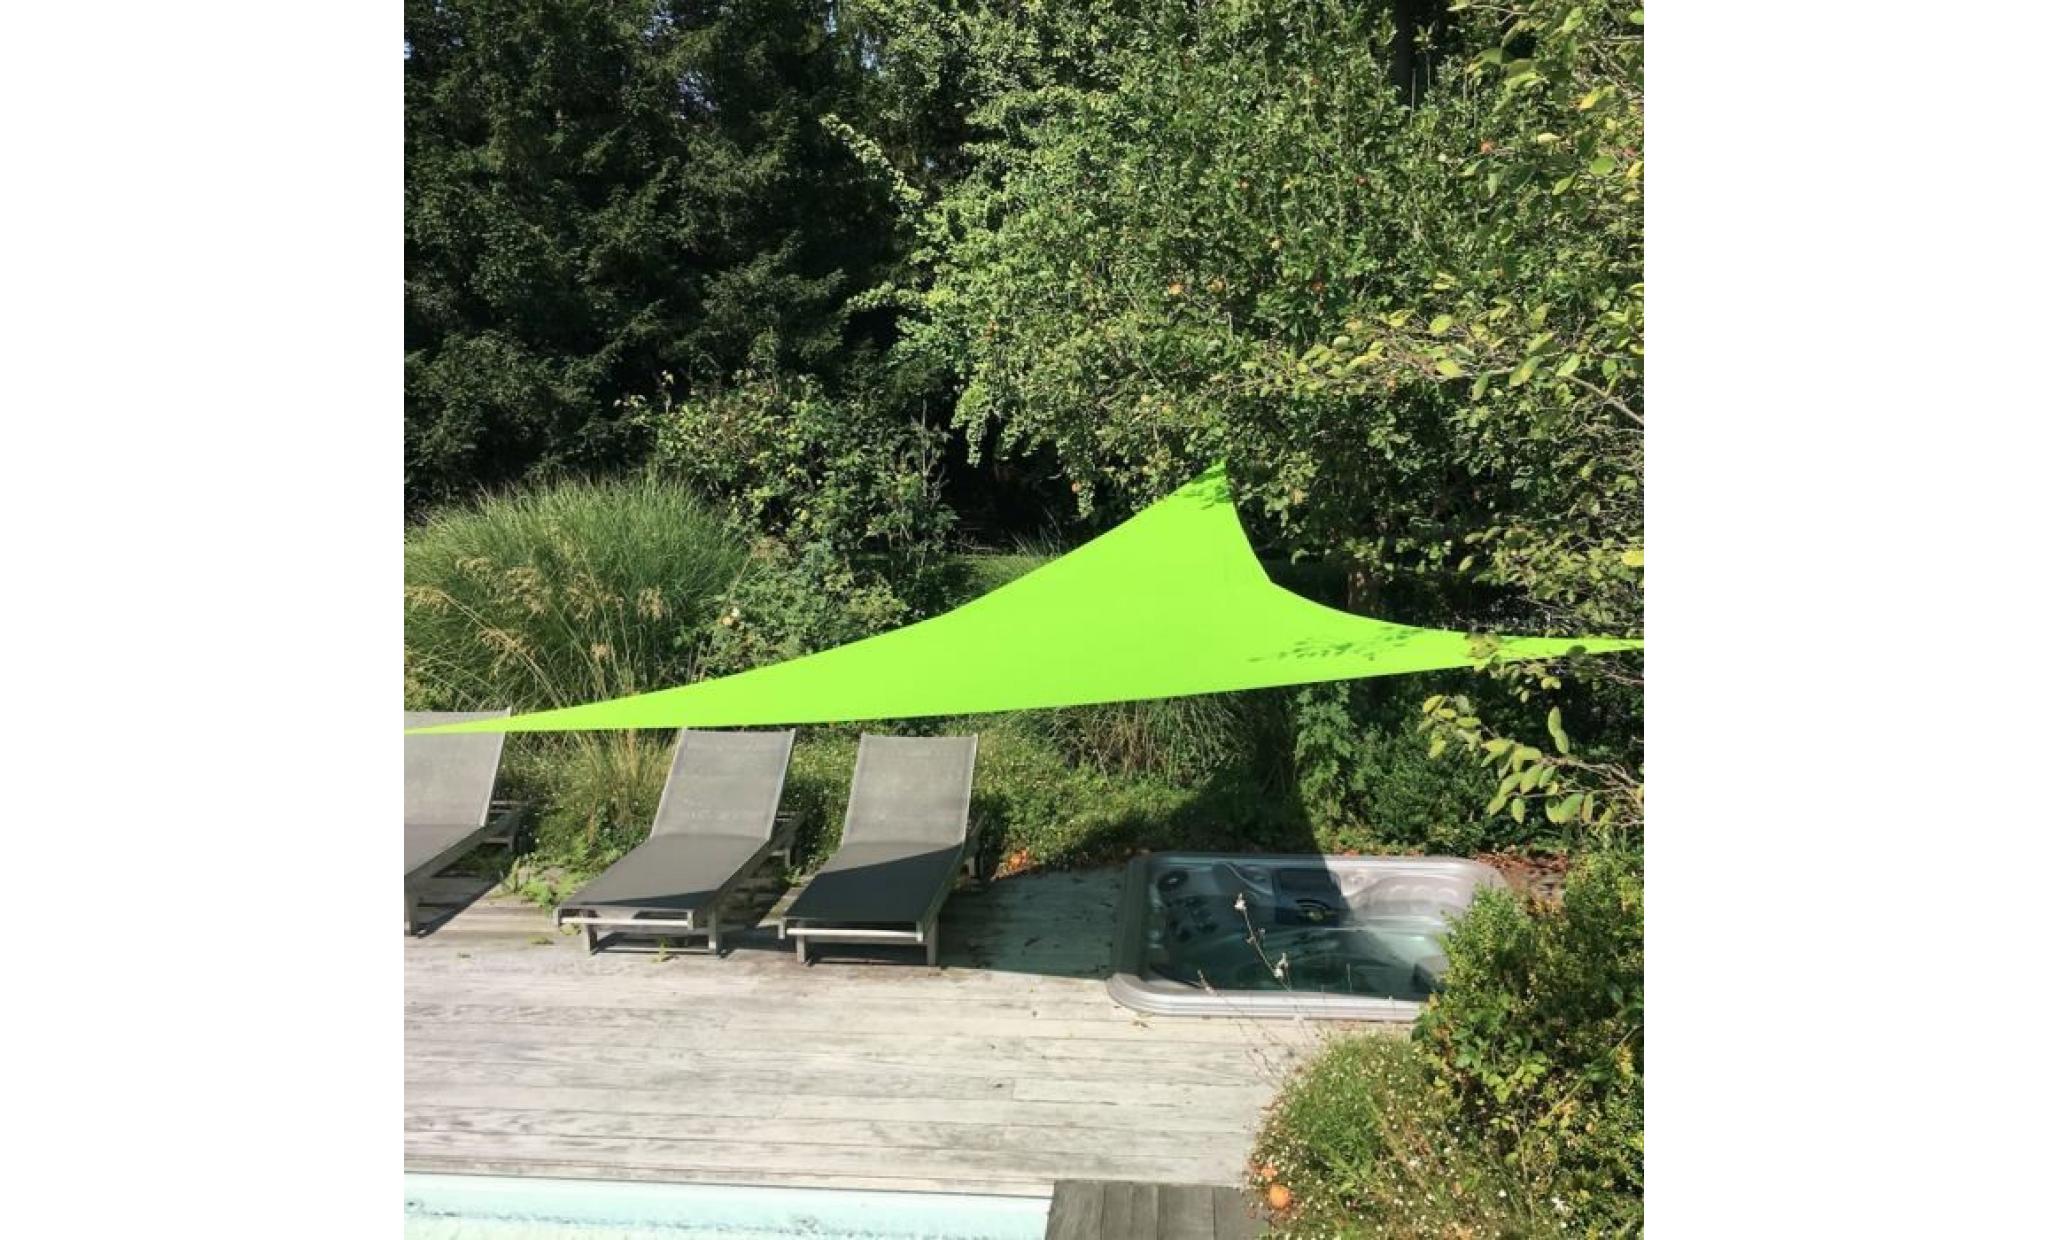 voile d’ombrage triangulaire extensible easywind 4 x 4 x 5,7m   bleu   anti uv upf 50+ pas cher